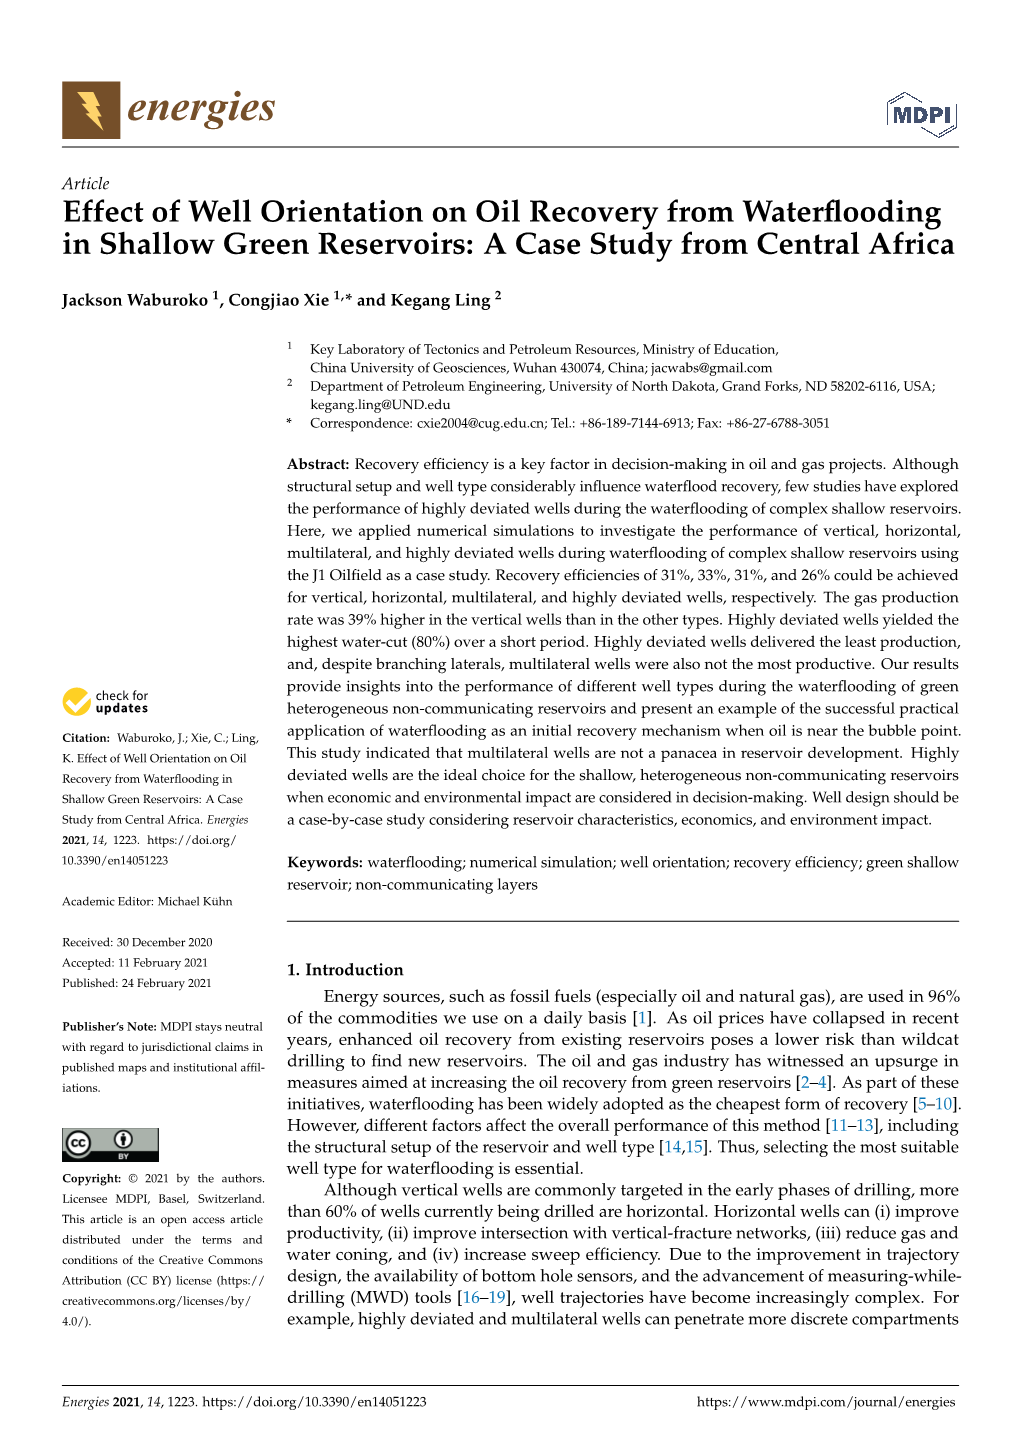 Effect of Well Orientation on Oil Recovery from Waterflooding in Shallow Green Reservoirs: a Case Study from Central Africa